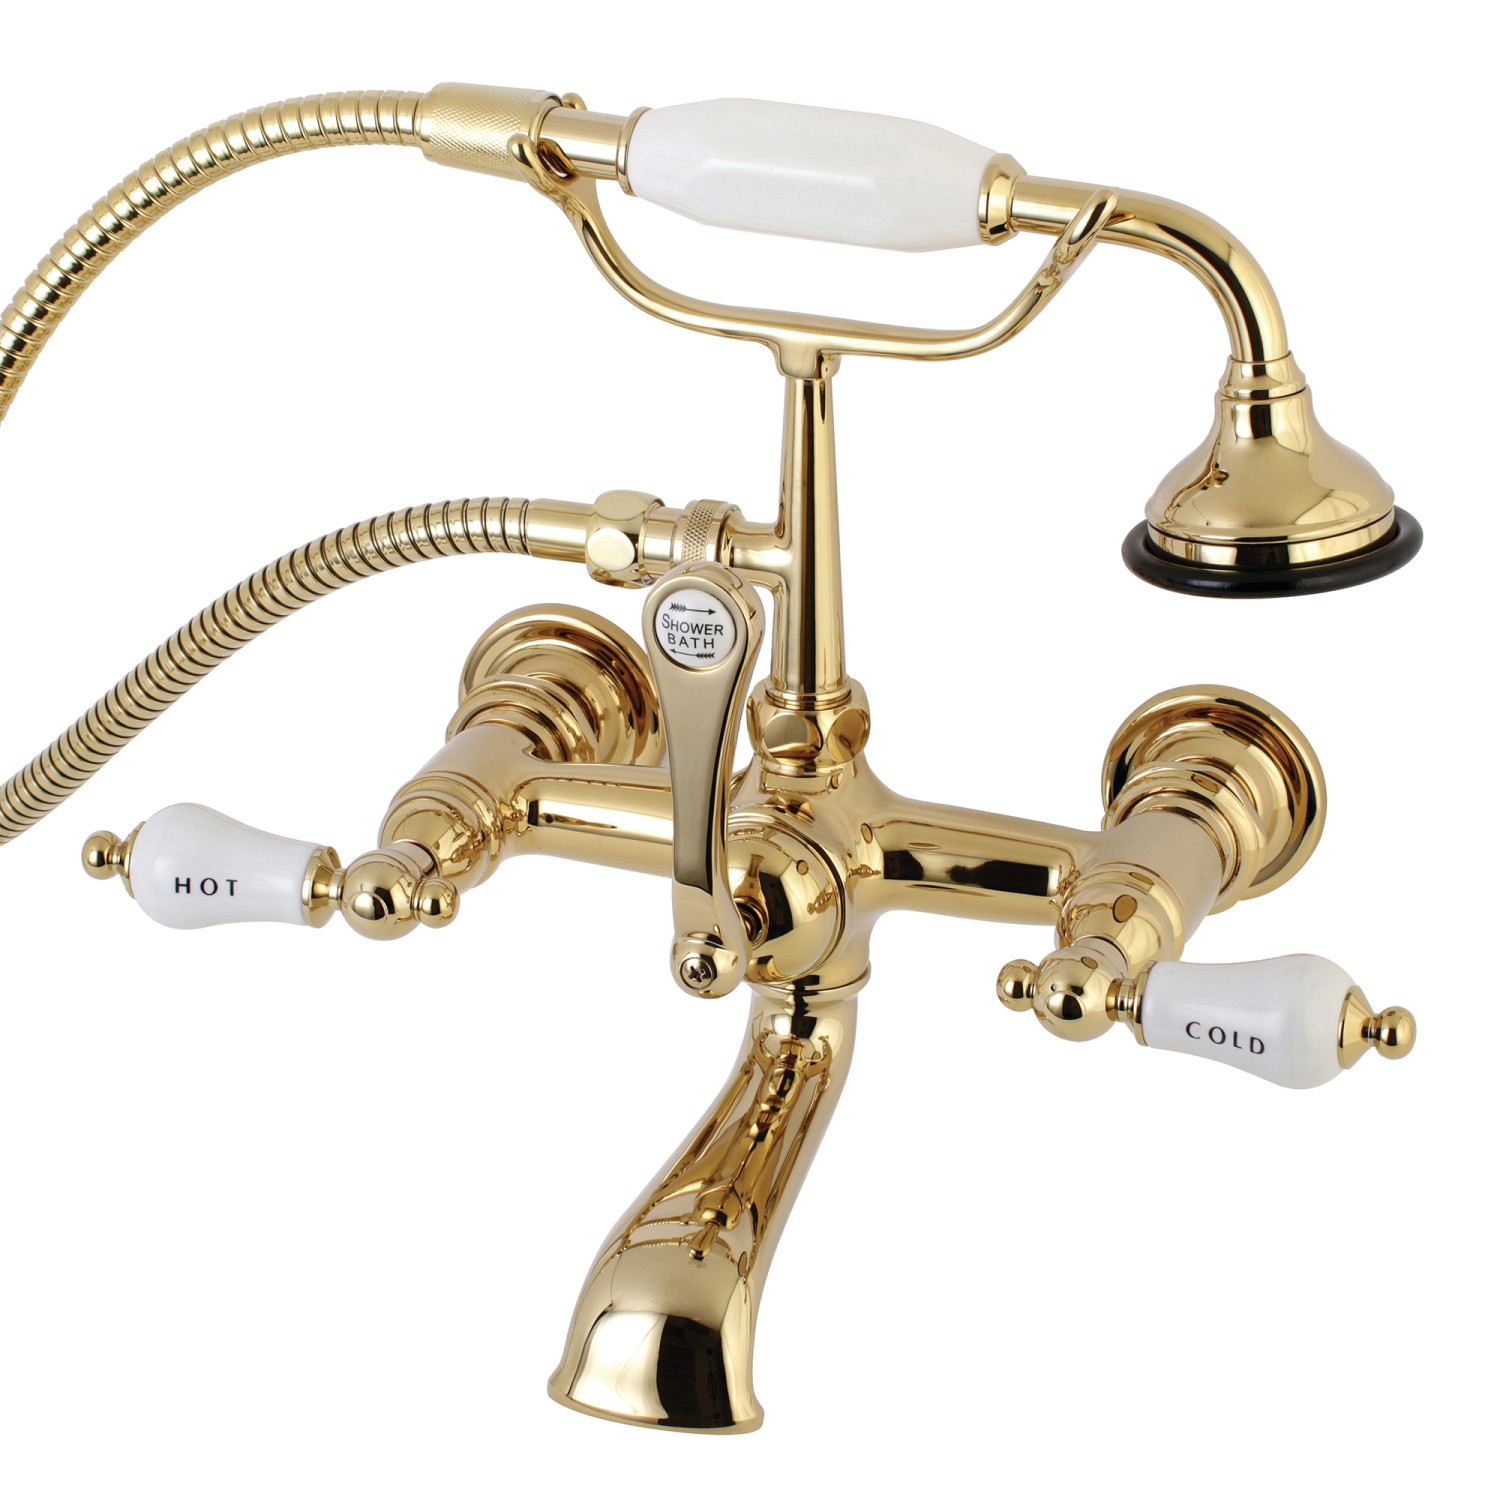 Kingston Brass Wall Mount ClawFoot Tub Faucet With Hand Shower CC22T1 Chrome 